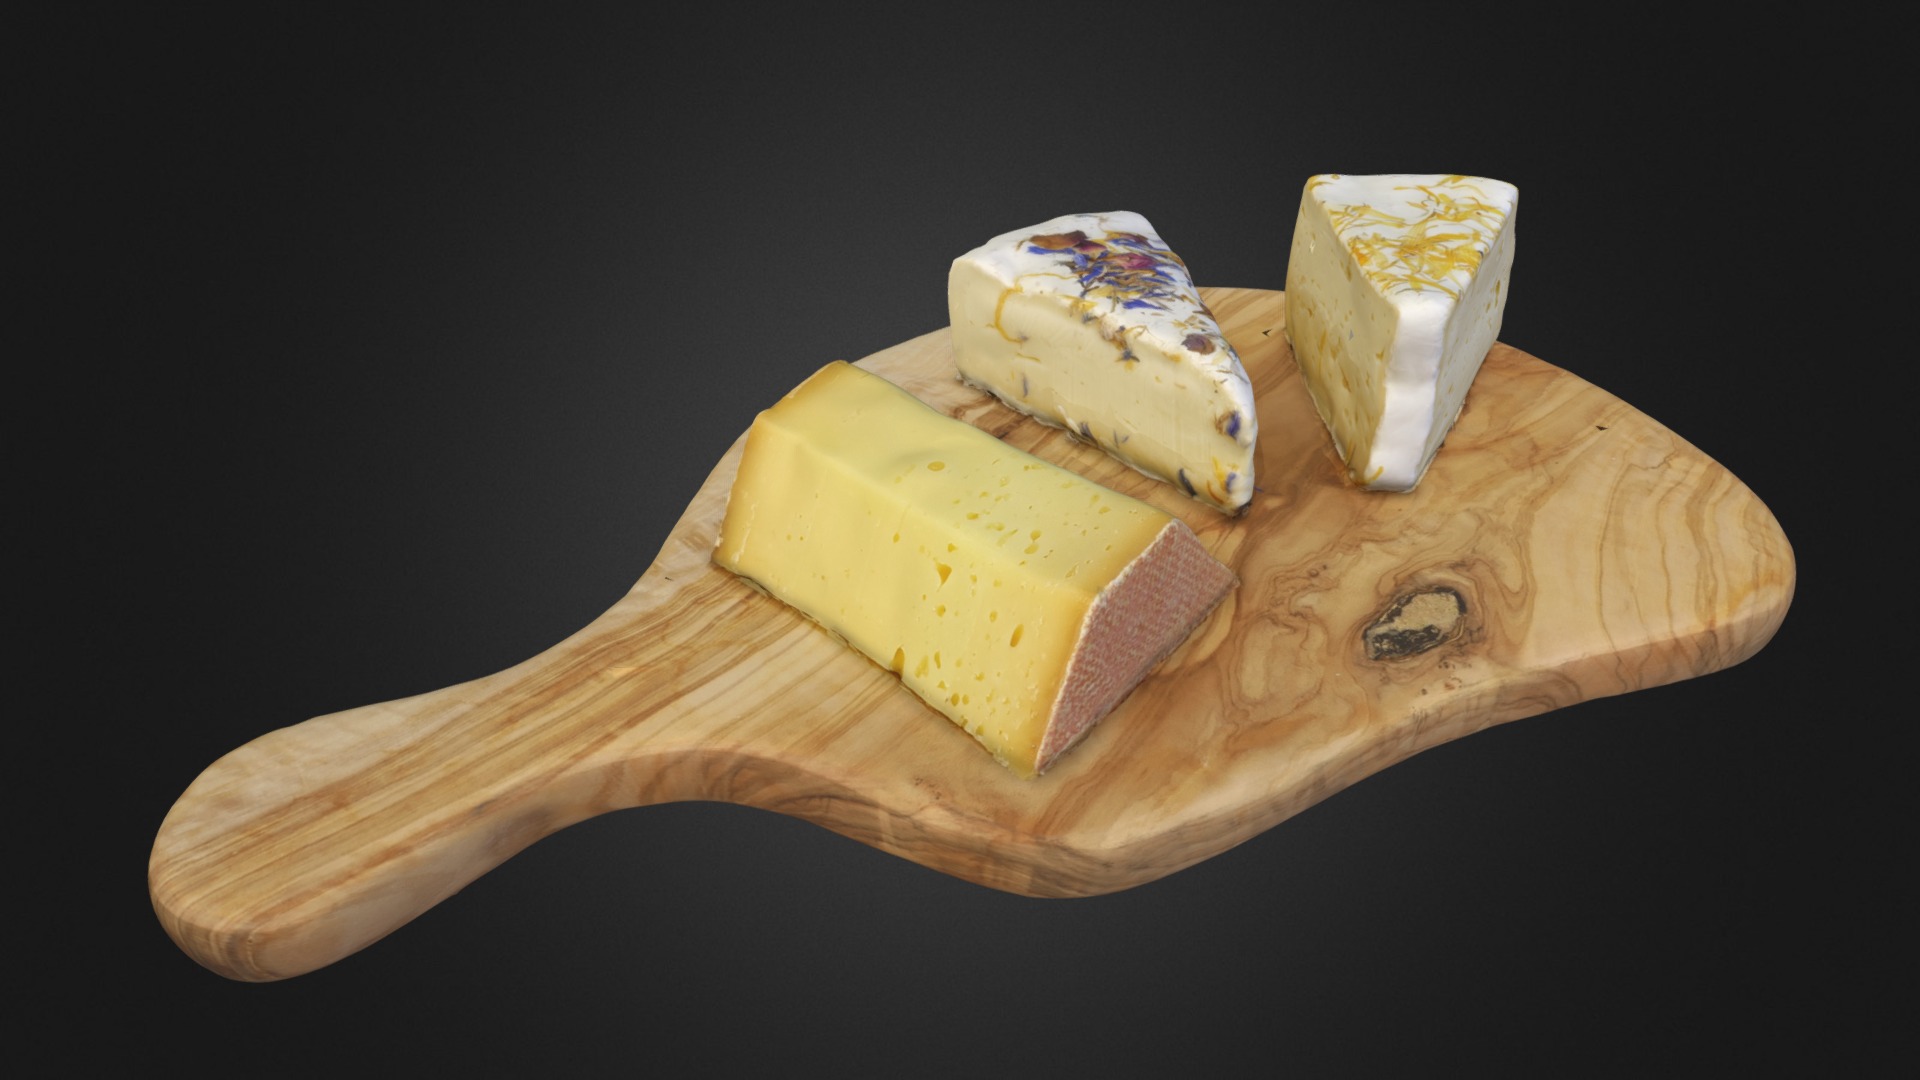 3D model Sunday breakfast cheese board - This is a 3D model of the Sunday breakfast cheese board. The 3D model is about a wooden spoon with cheese on it.